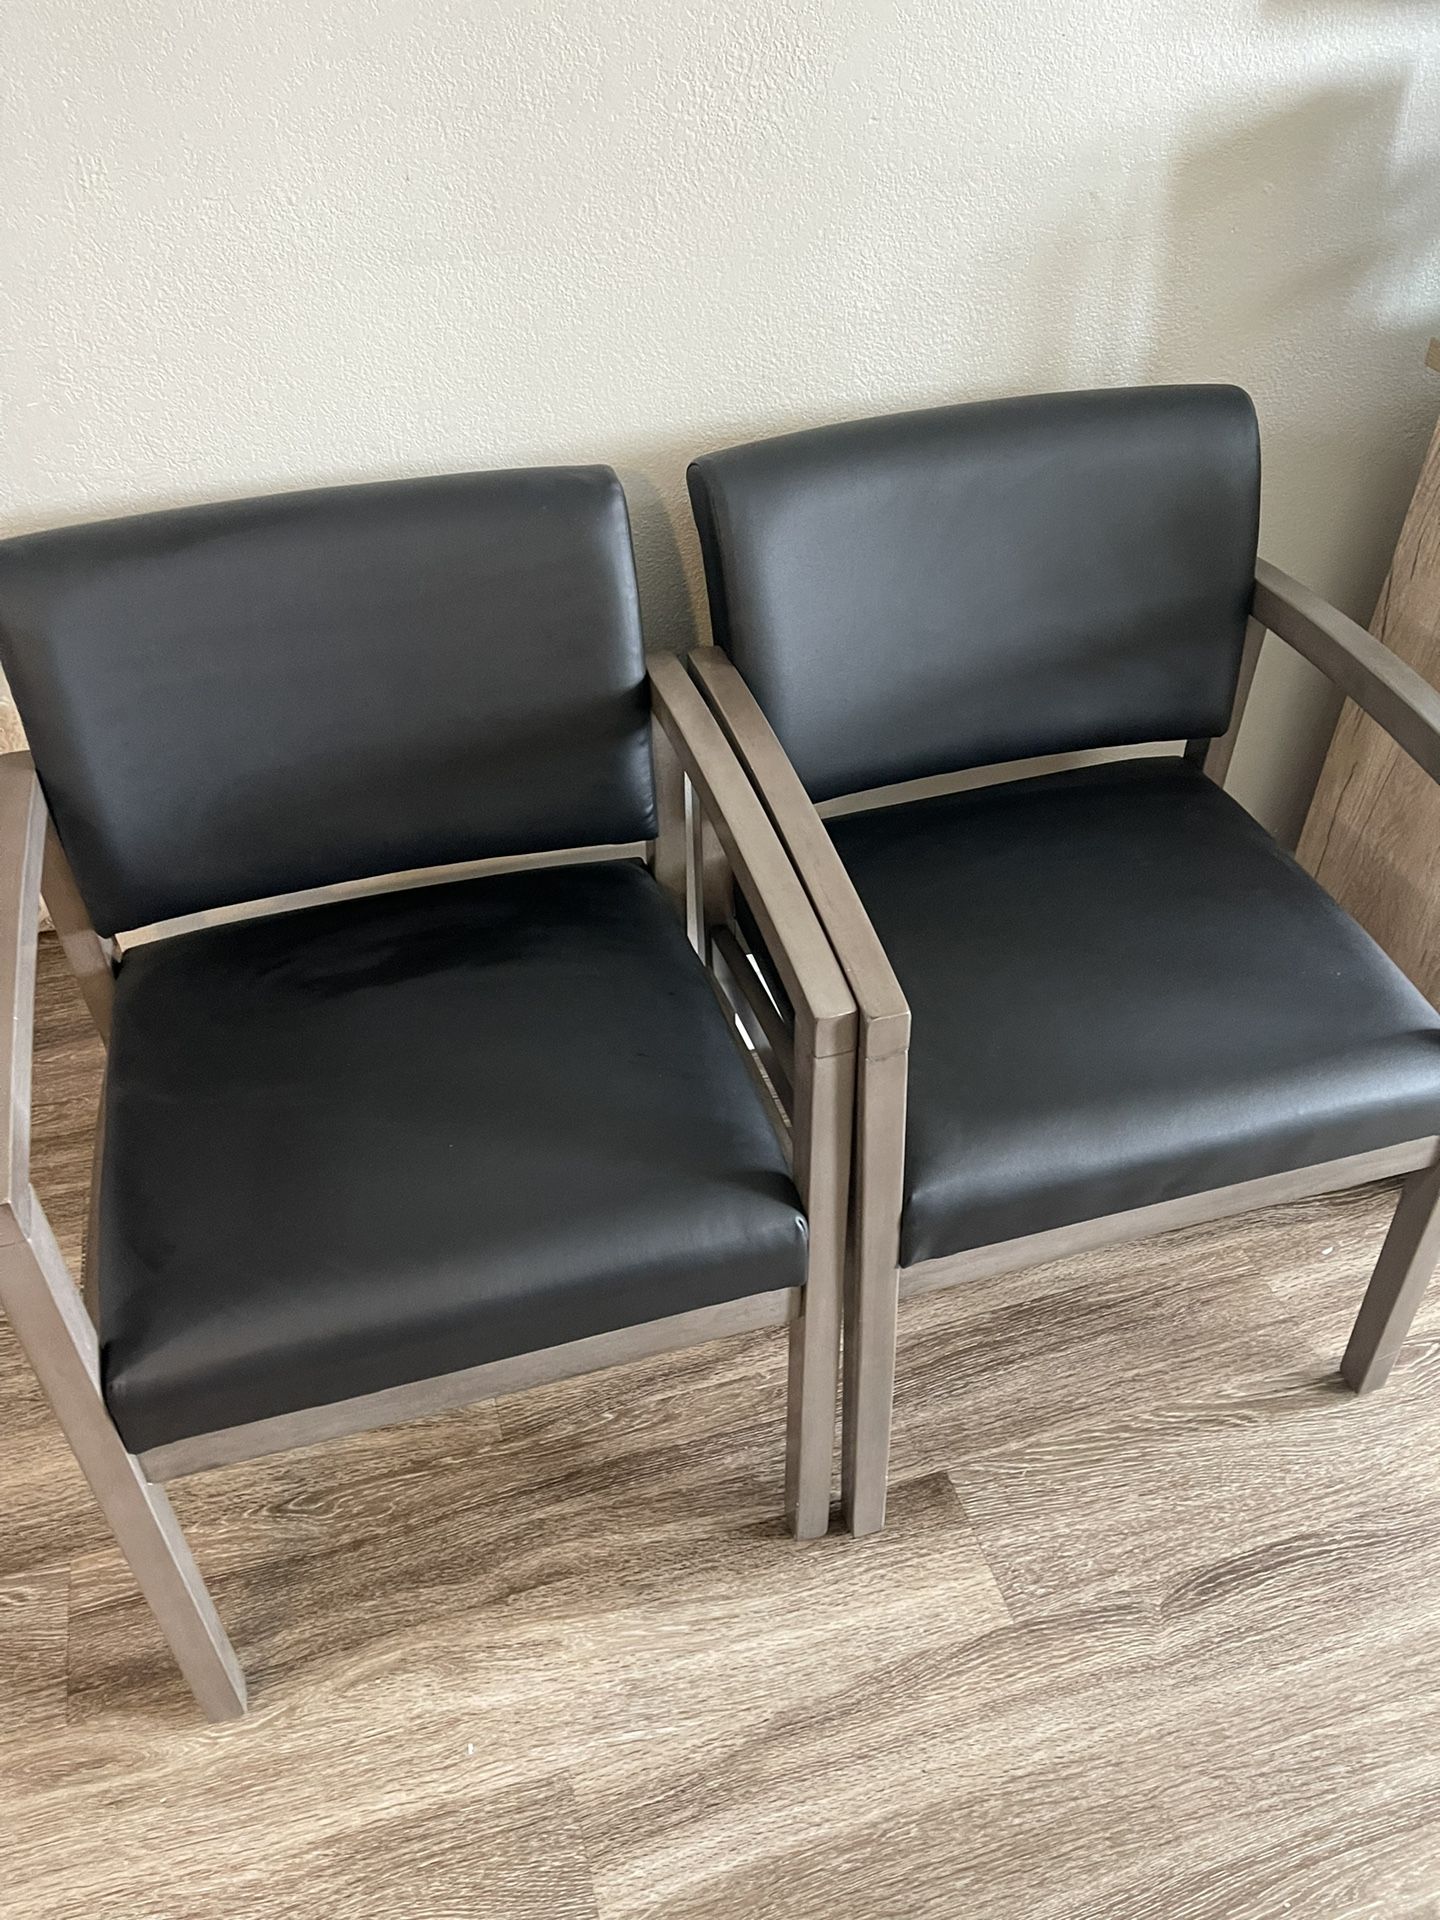 Back Chairs 